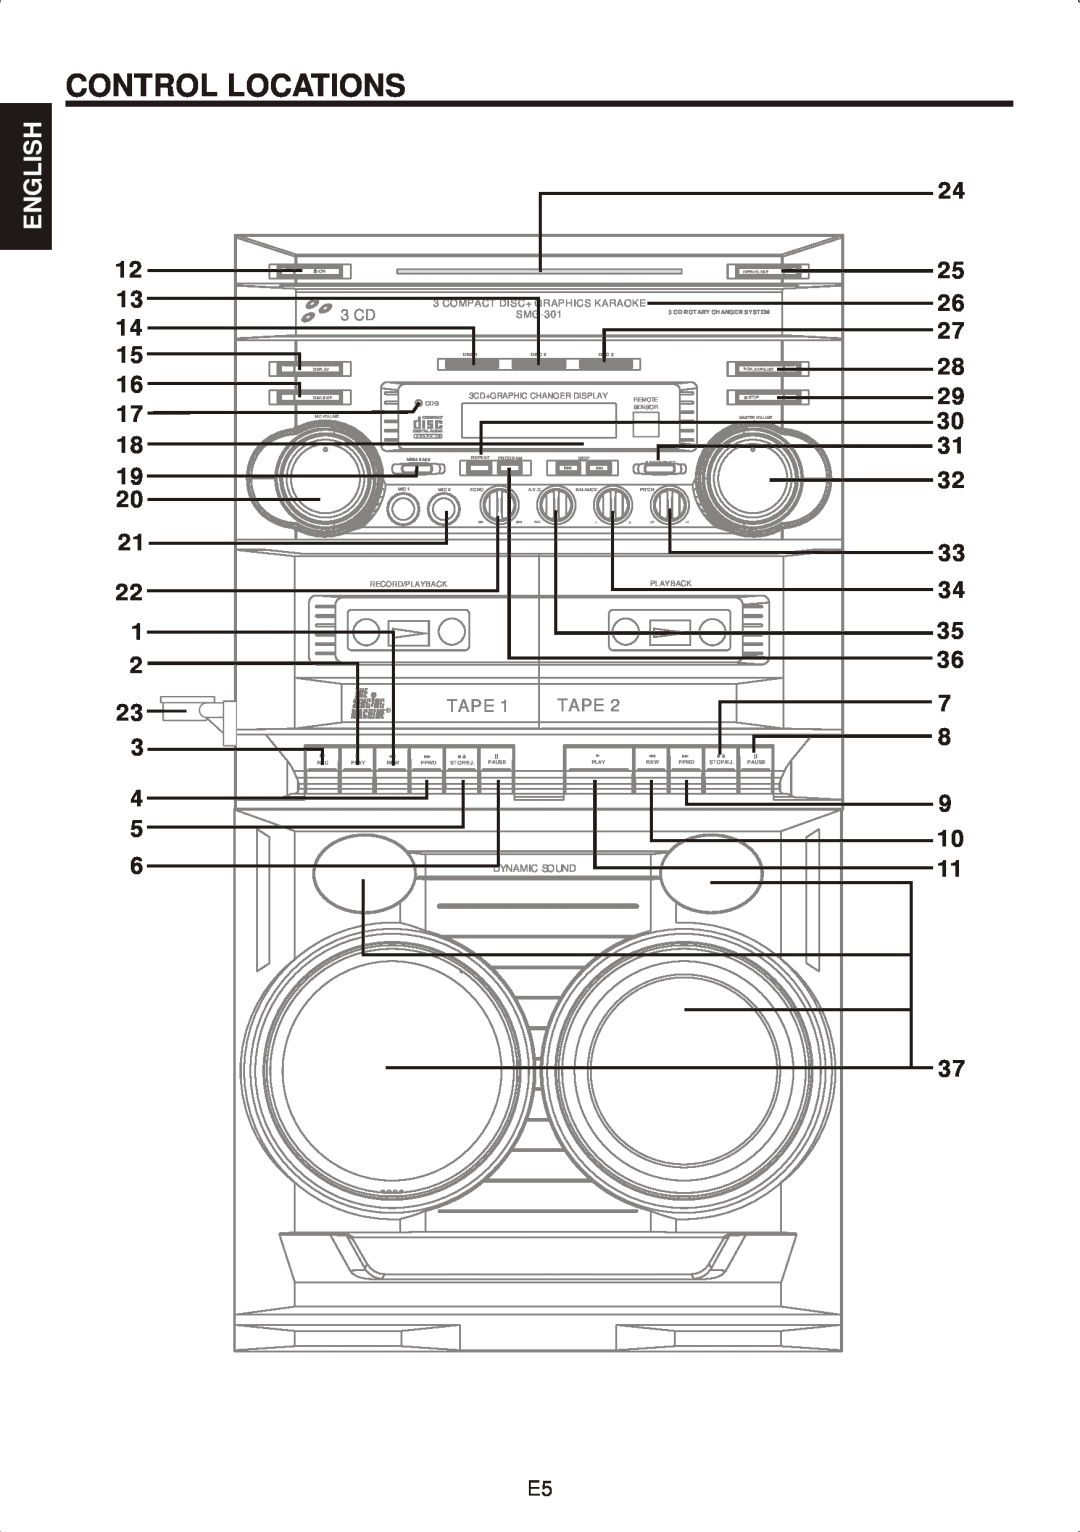 The Singing Machine SMG-301 manual Control Locations, English, Tape 